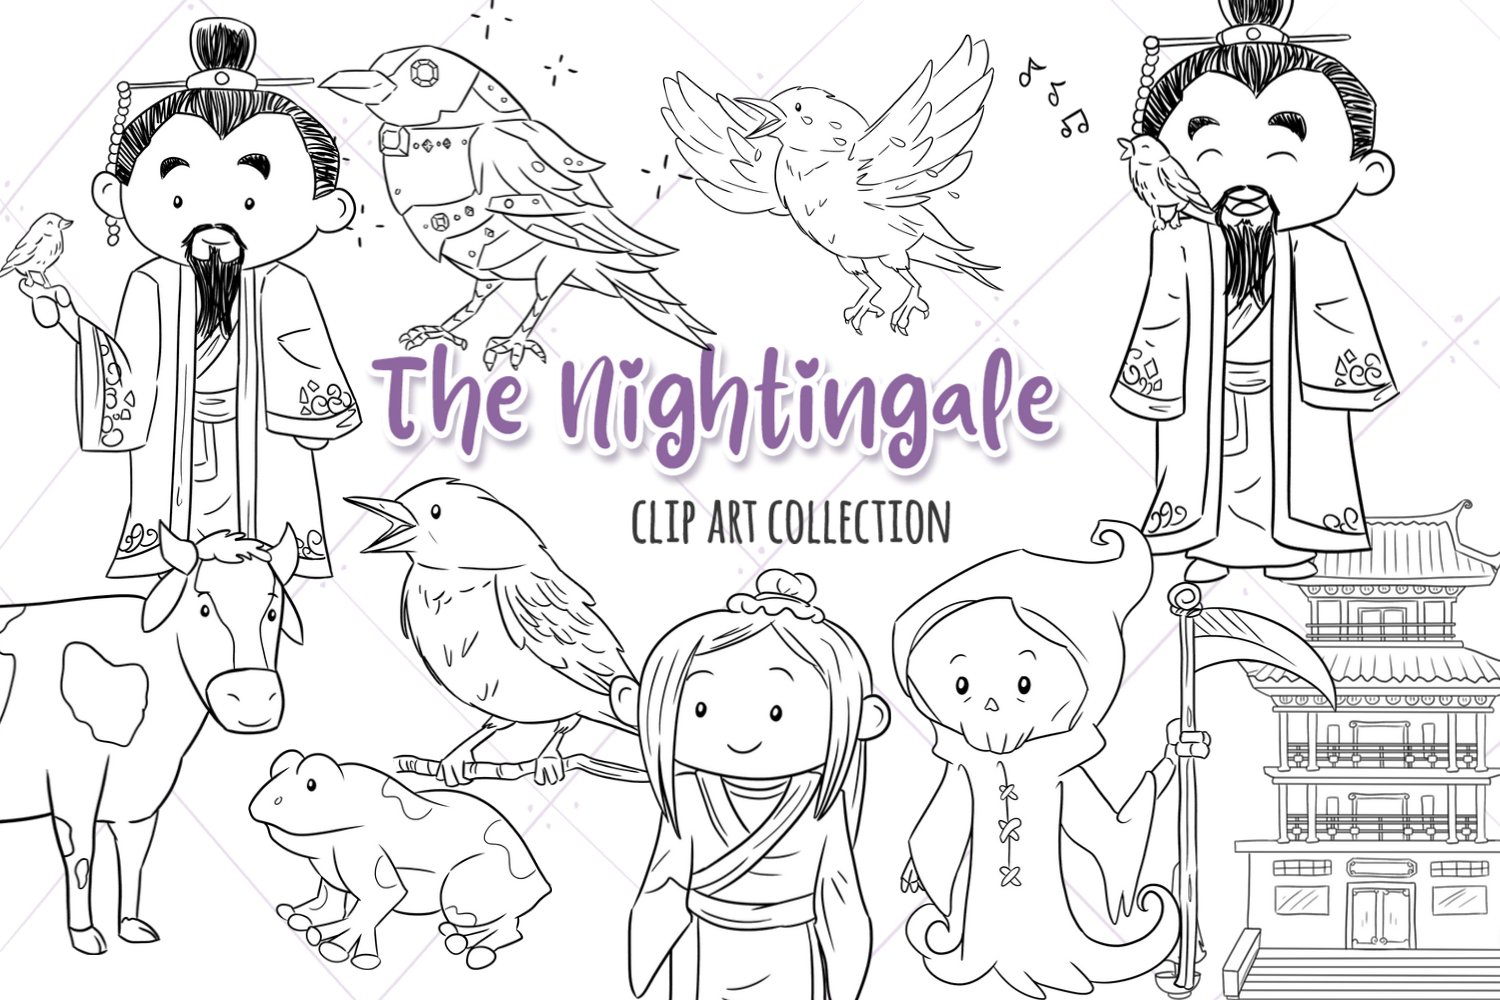 The nightingale fairy tale clip art collection